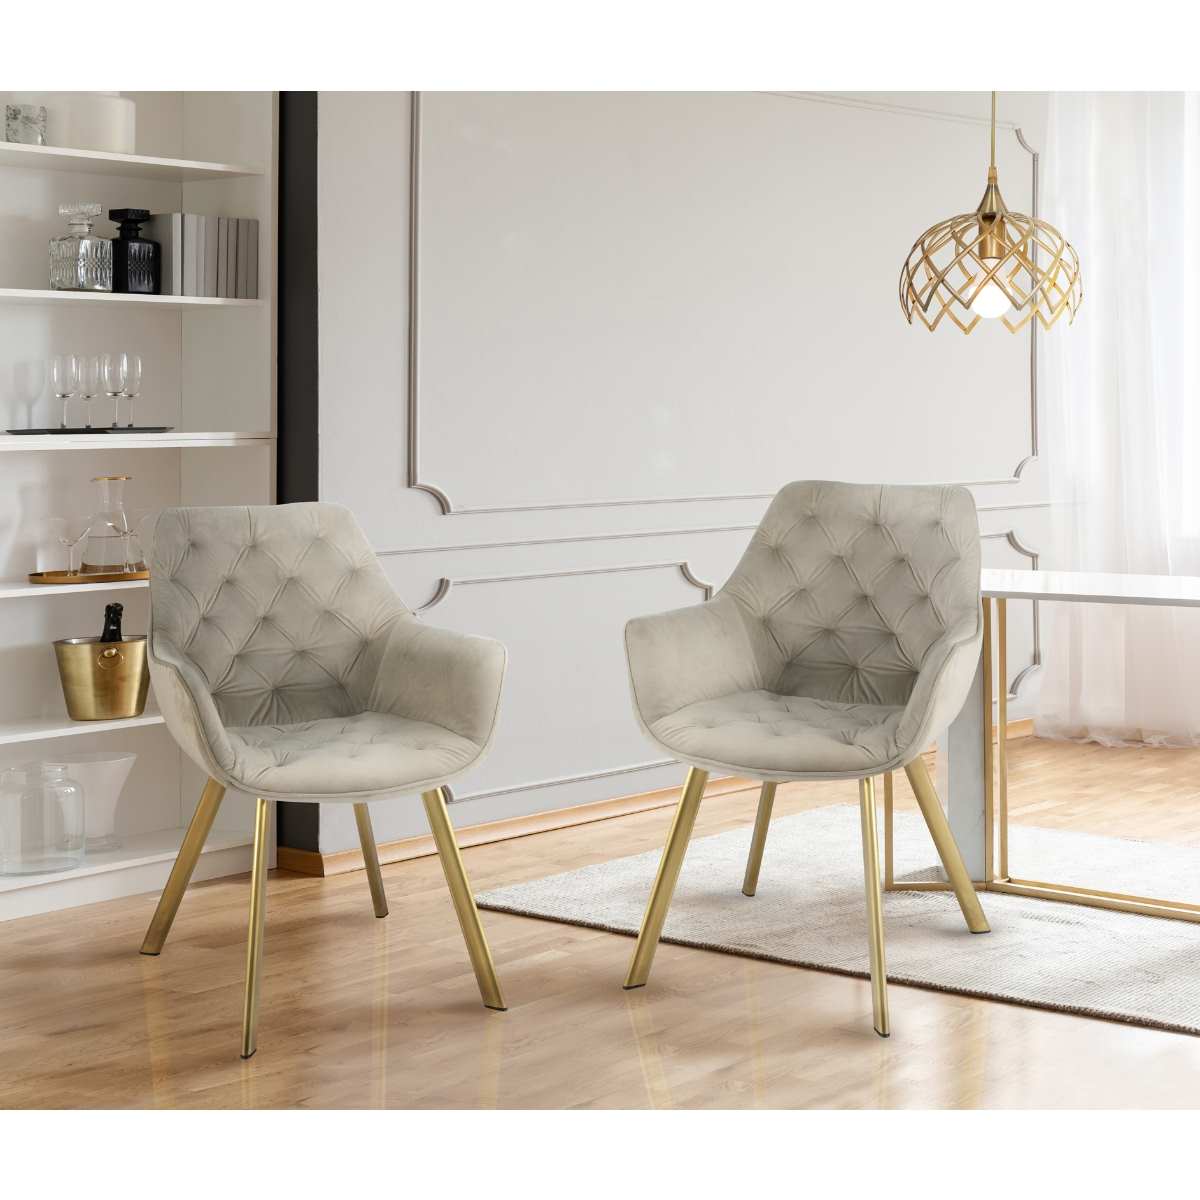 Ayami Chairs Set Of 2 Beige With Gold Legs 1322